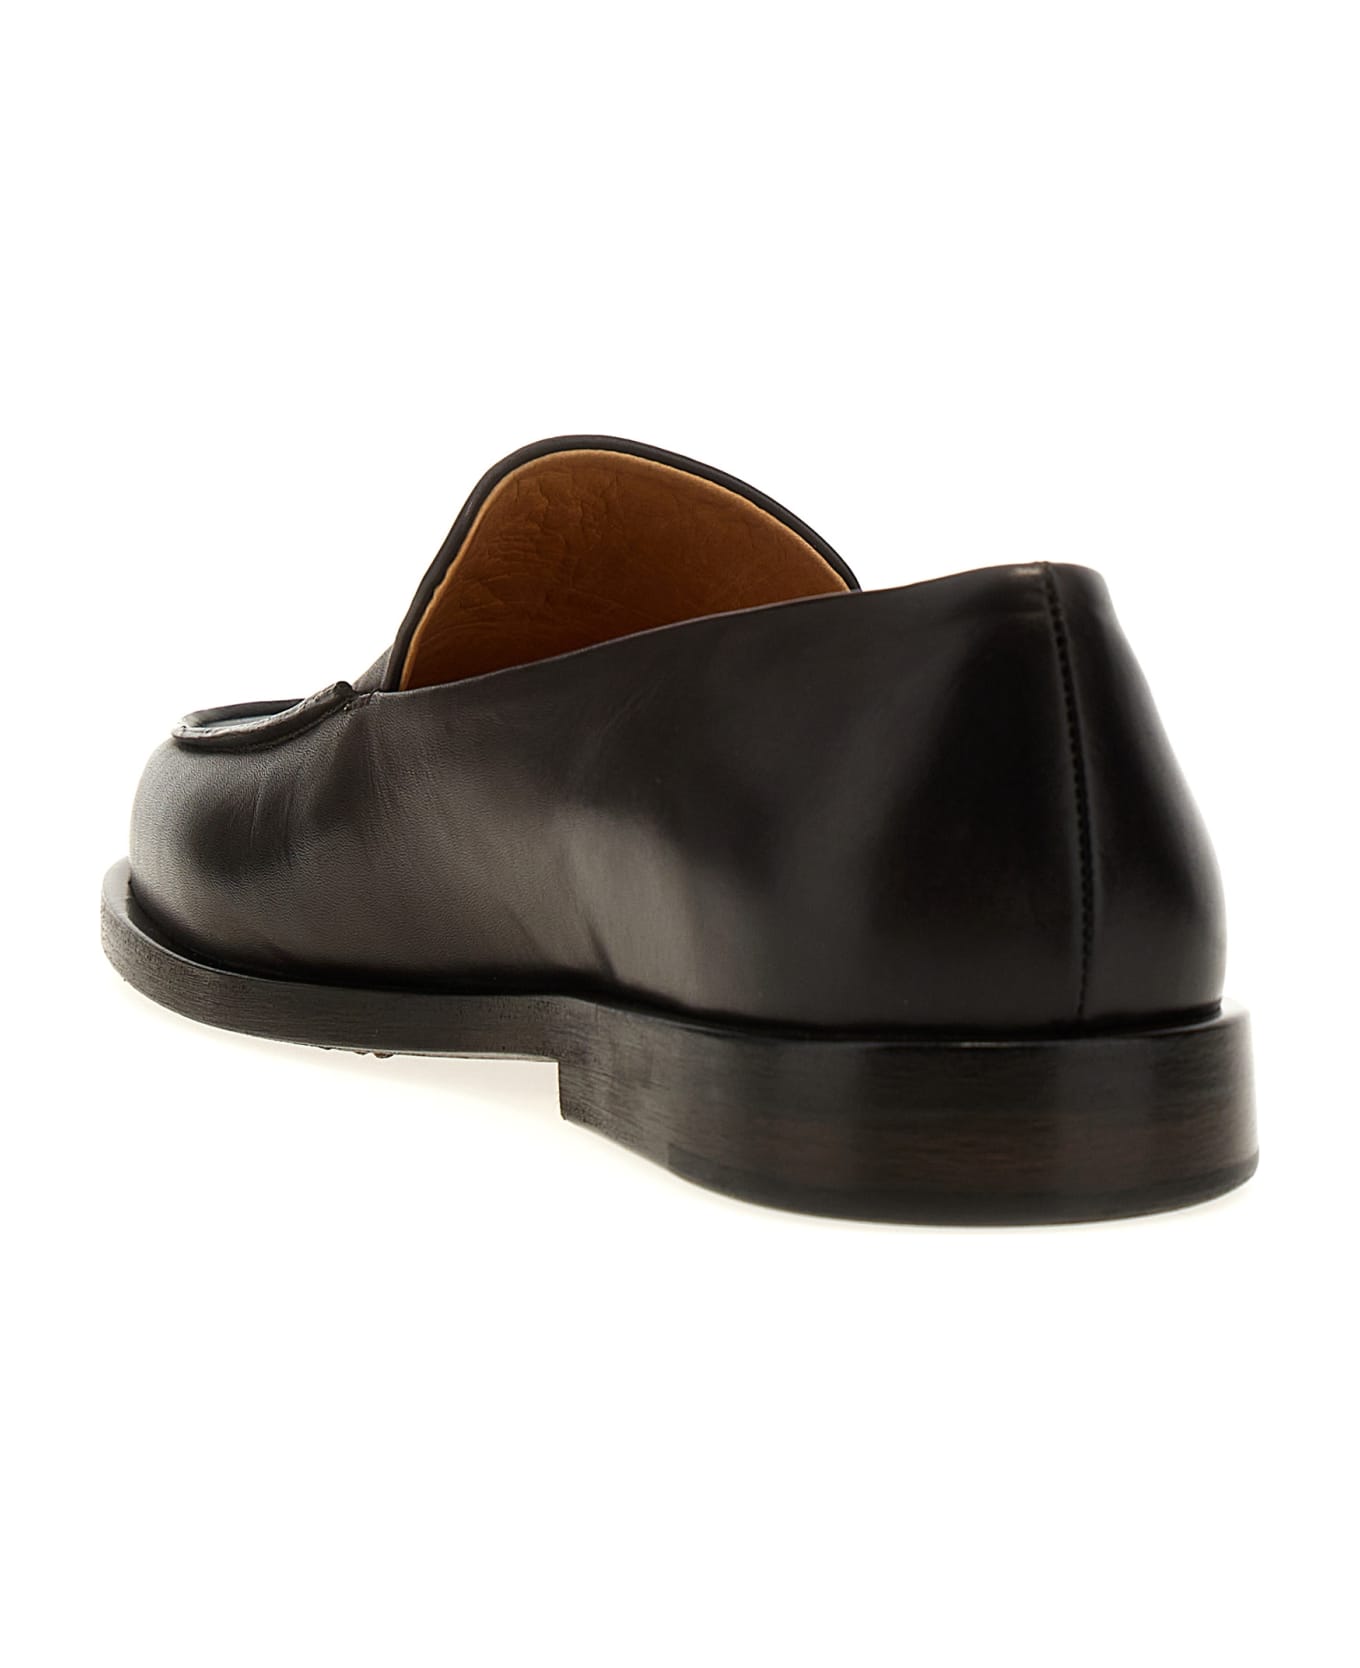 Marsell 'mocasso' Loafers - Dark Brown